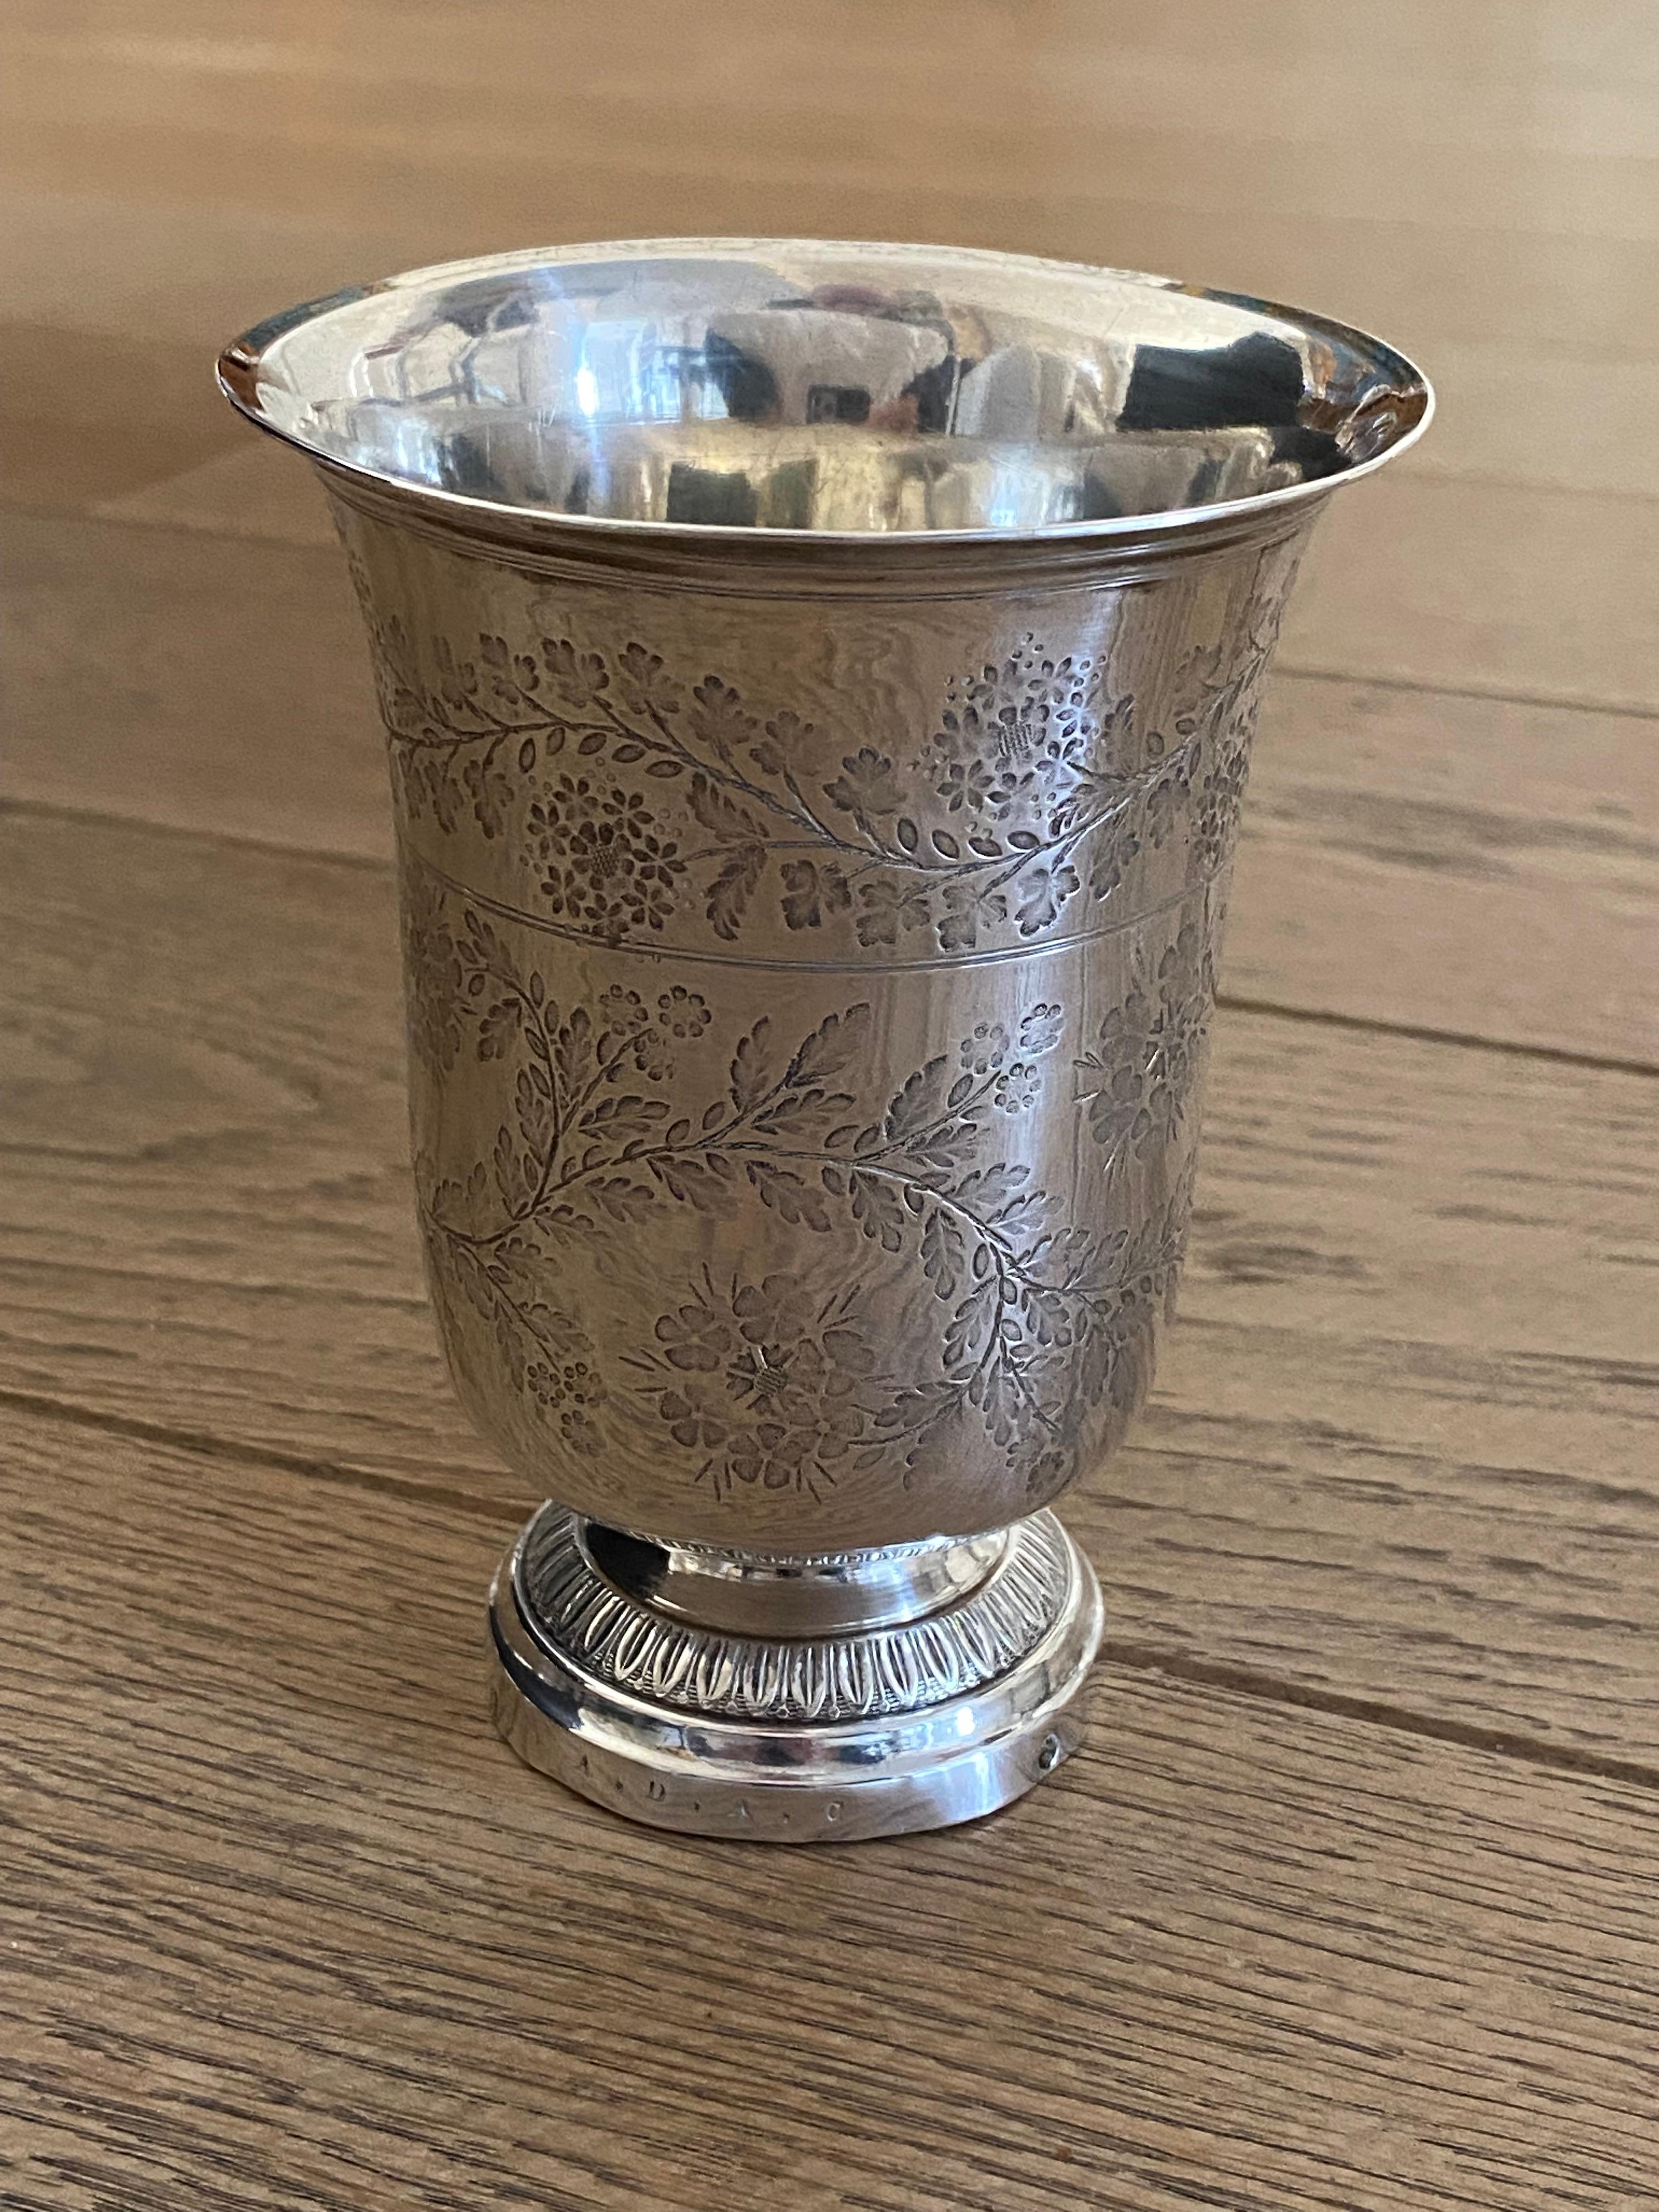 French 19th century solid silver tulip beaker. The body finely chiseled with branches, flowers and leaves and the pedestal decorated with a frieze of water leaves.

Material: Silver 1st title 950°/°°
Hallmark: Vieillard - Paris 1819-1838
Period: